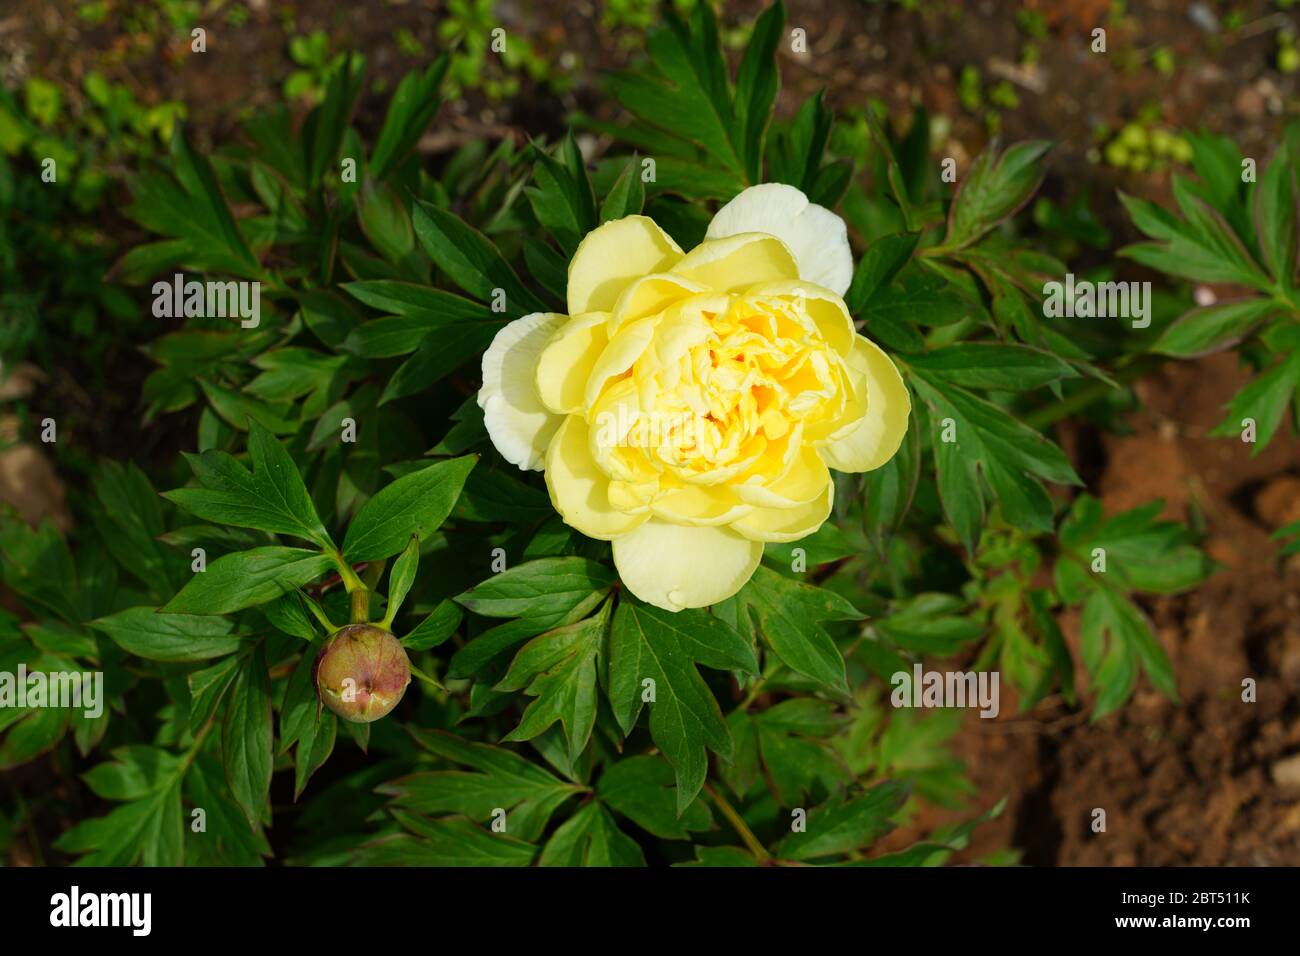 Yellow flower of a Bartzella Itoh peony plant, a cross between a tree peony and herbaceous peony Stock Photo